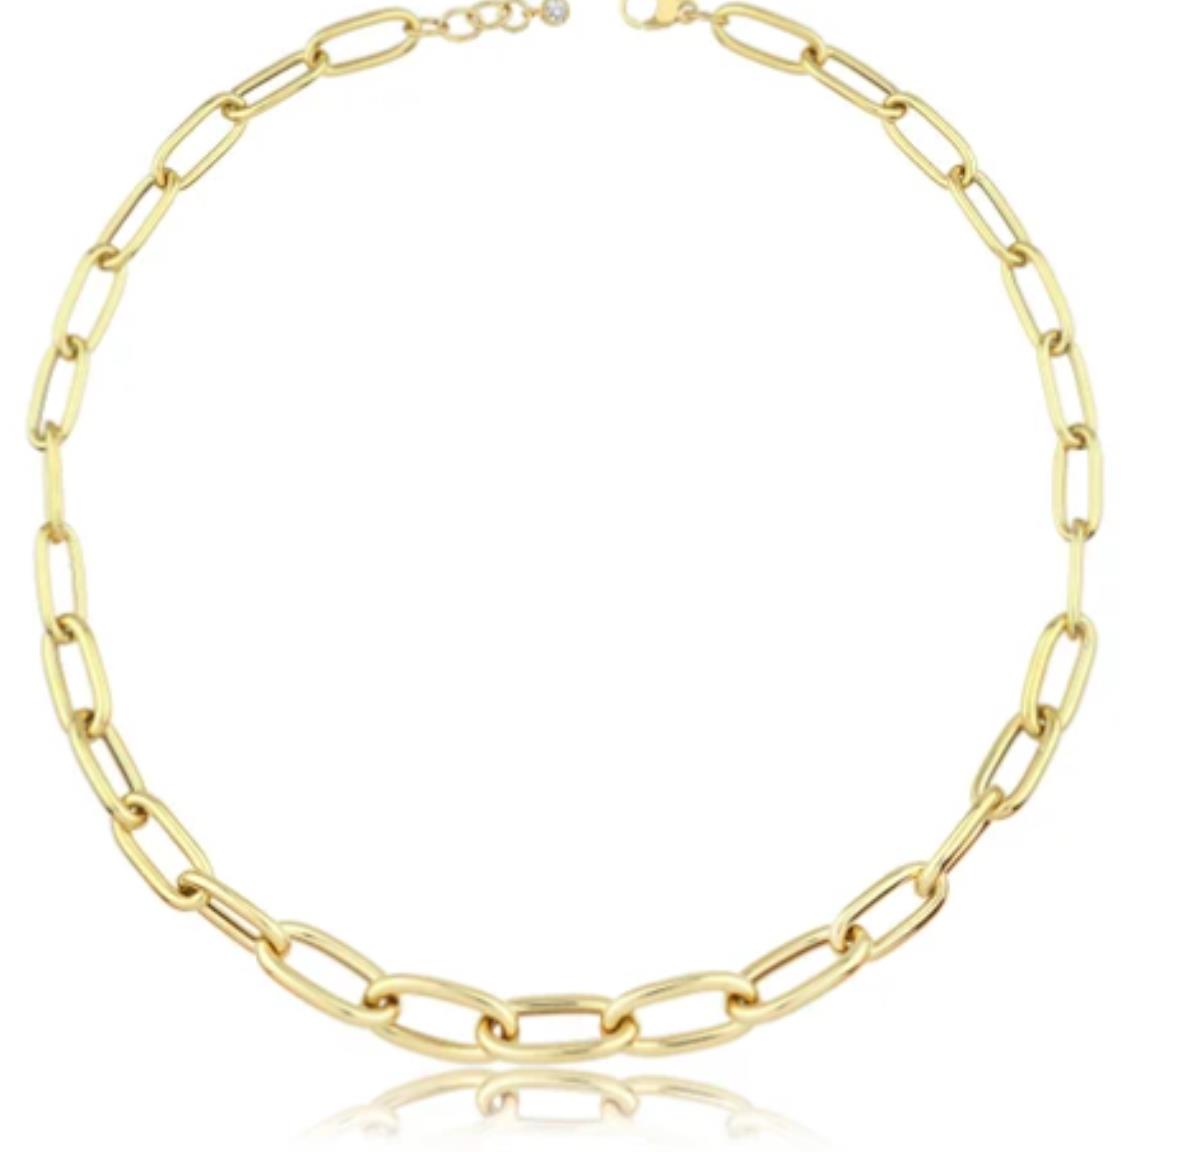 14K Yellow Gold Graduated Paperclip 7.25" Chain Bracelet